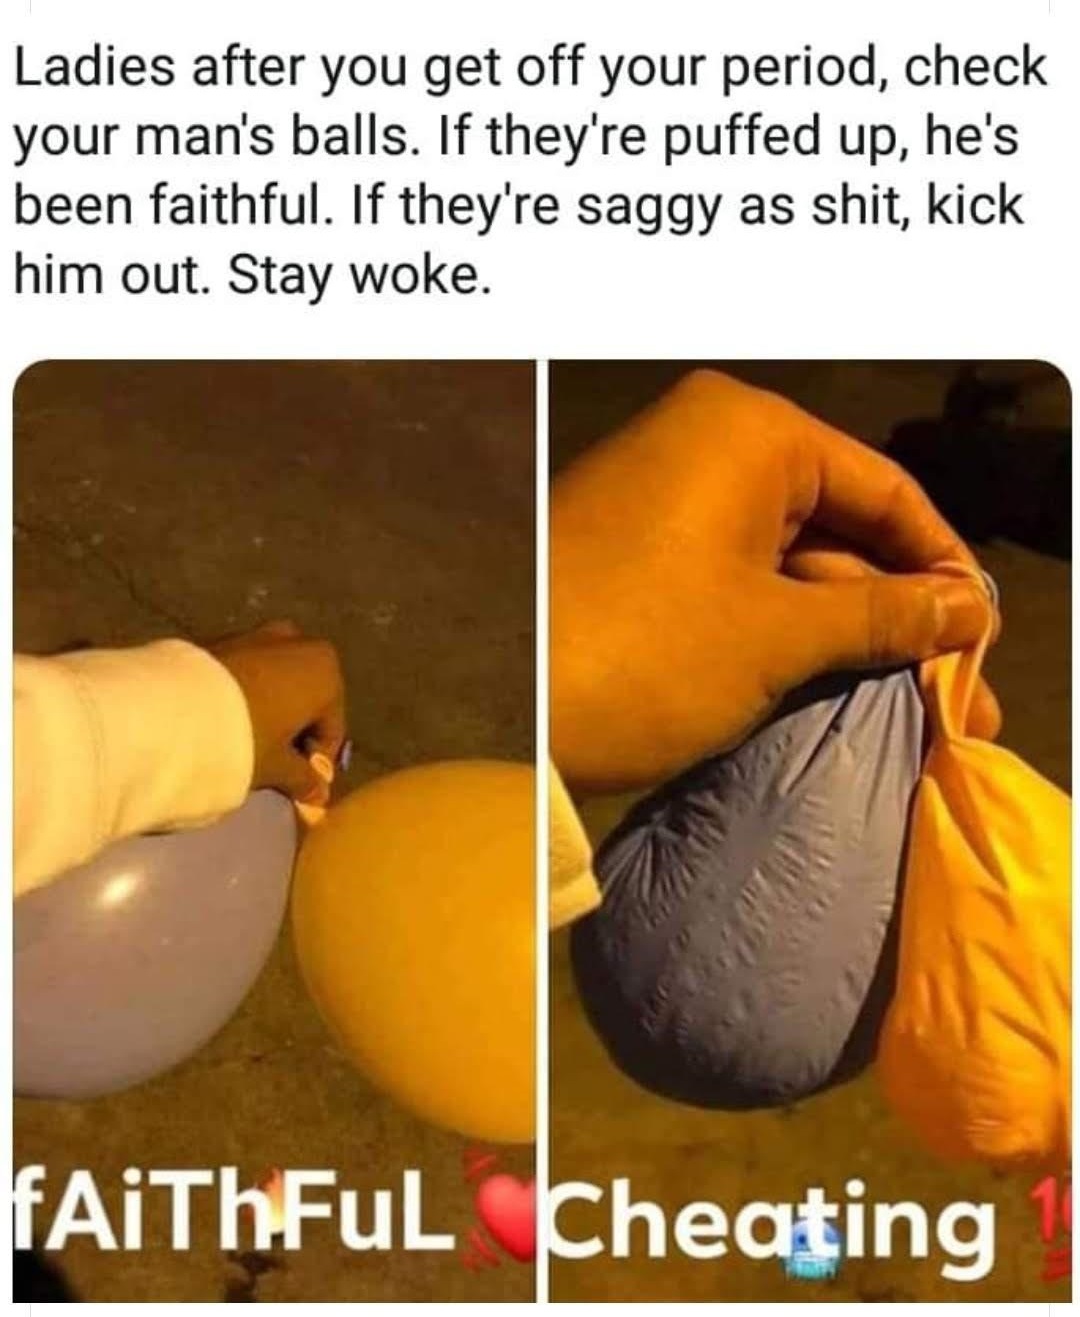 photo caption - Ladies after you get off your period, check your man's balls. If they're puffed up, he's been faithful. If they're saggy as shit, kick him out. Stay woke. fAiThFuL Cheating